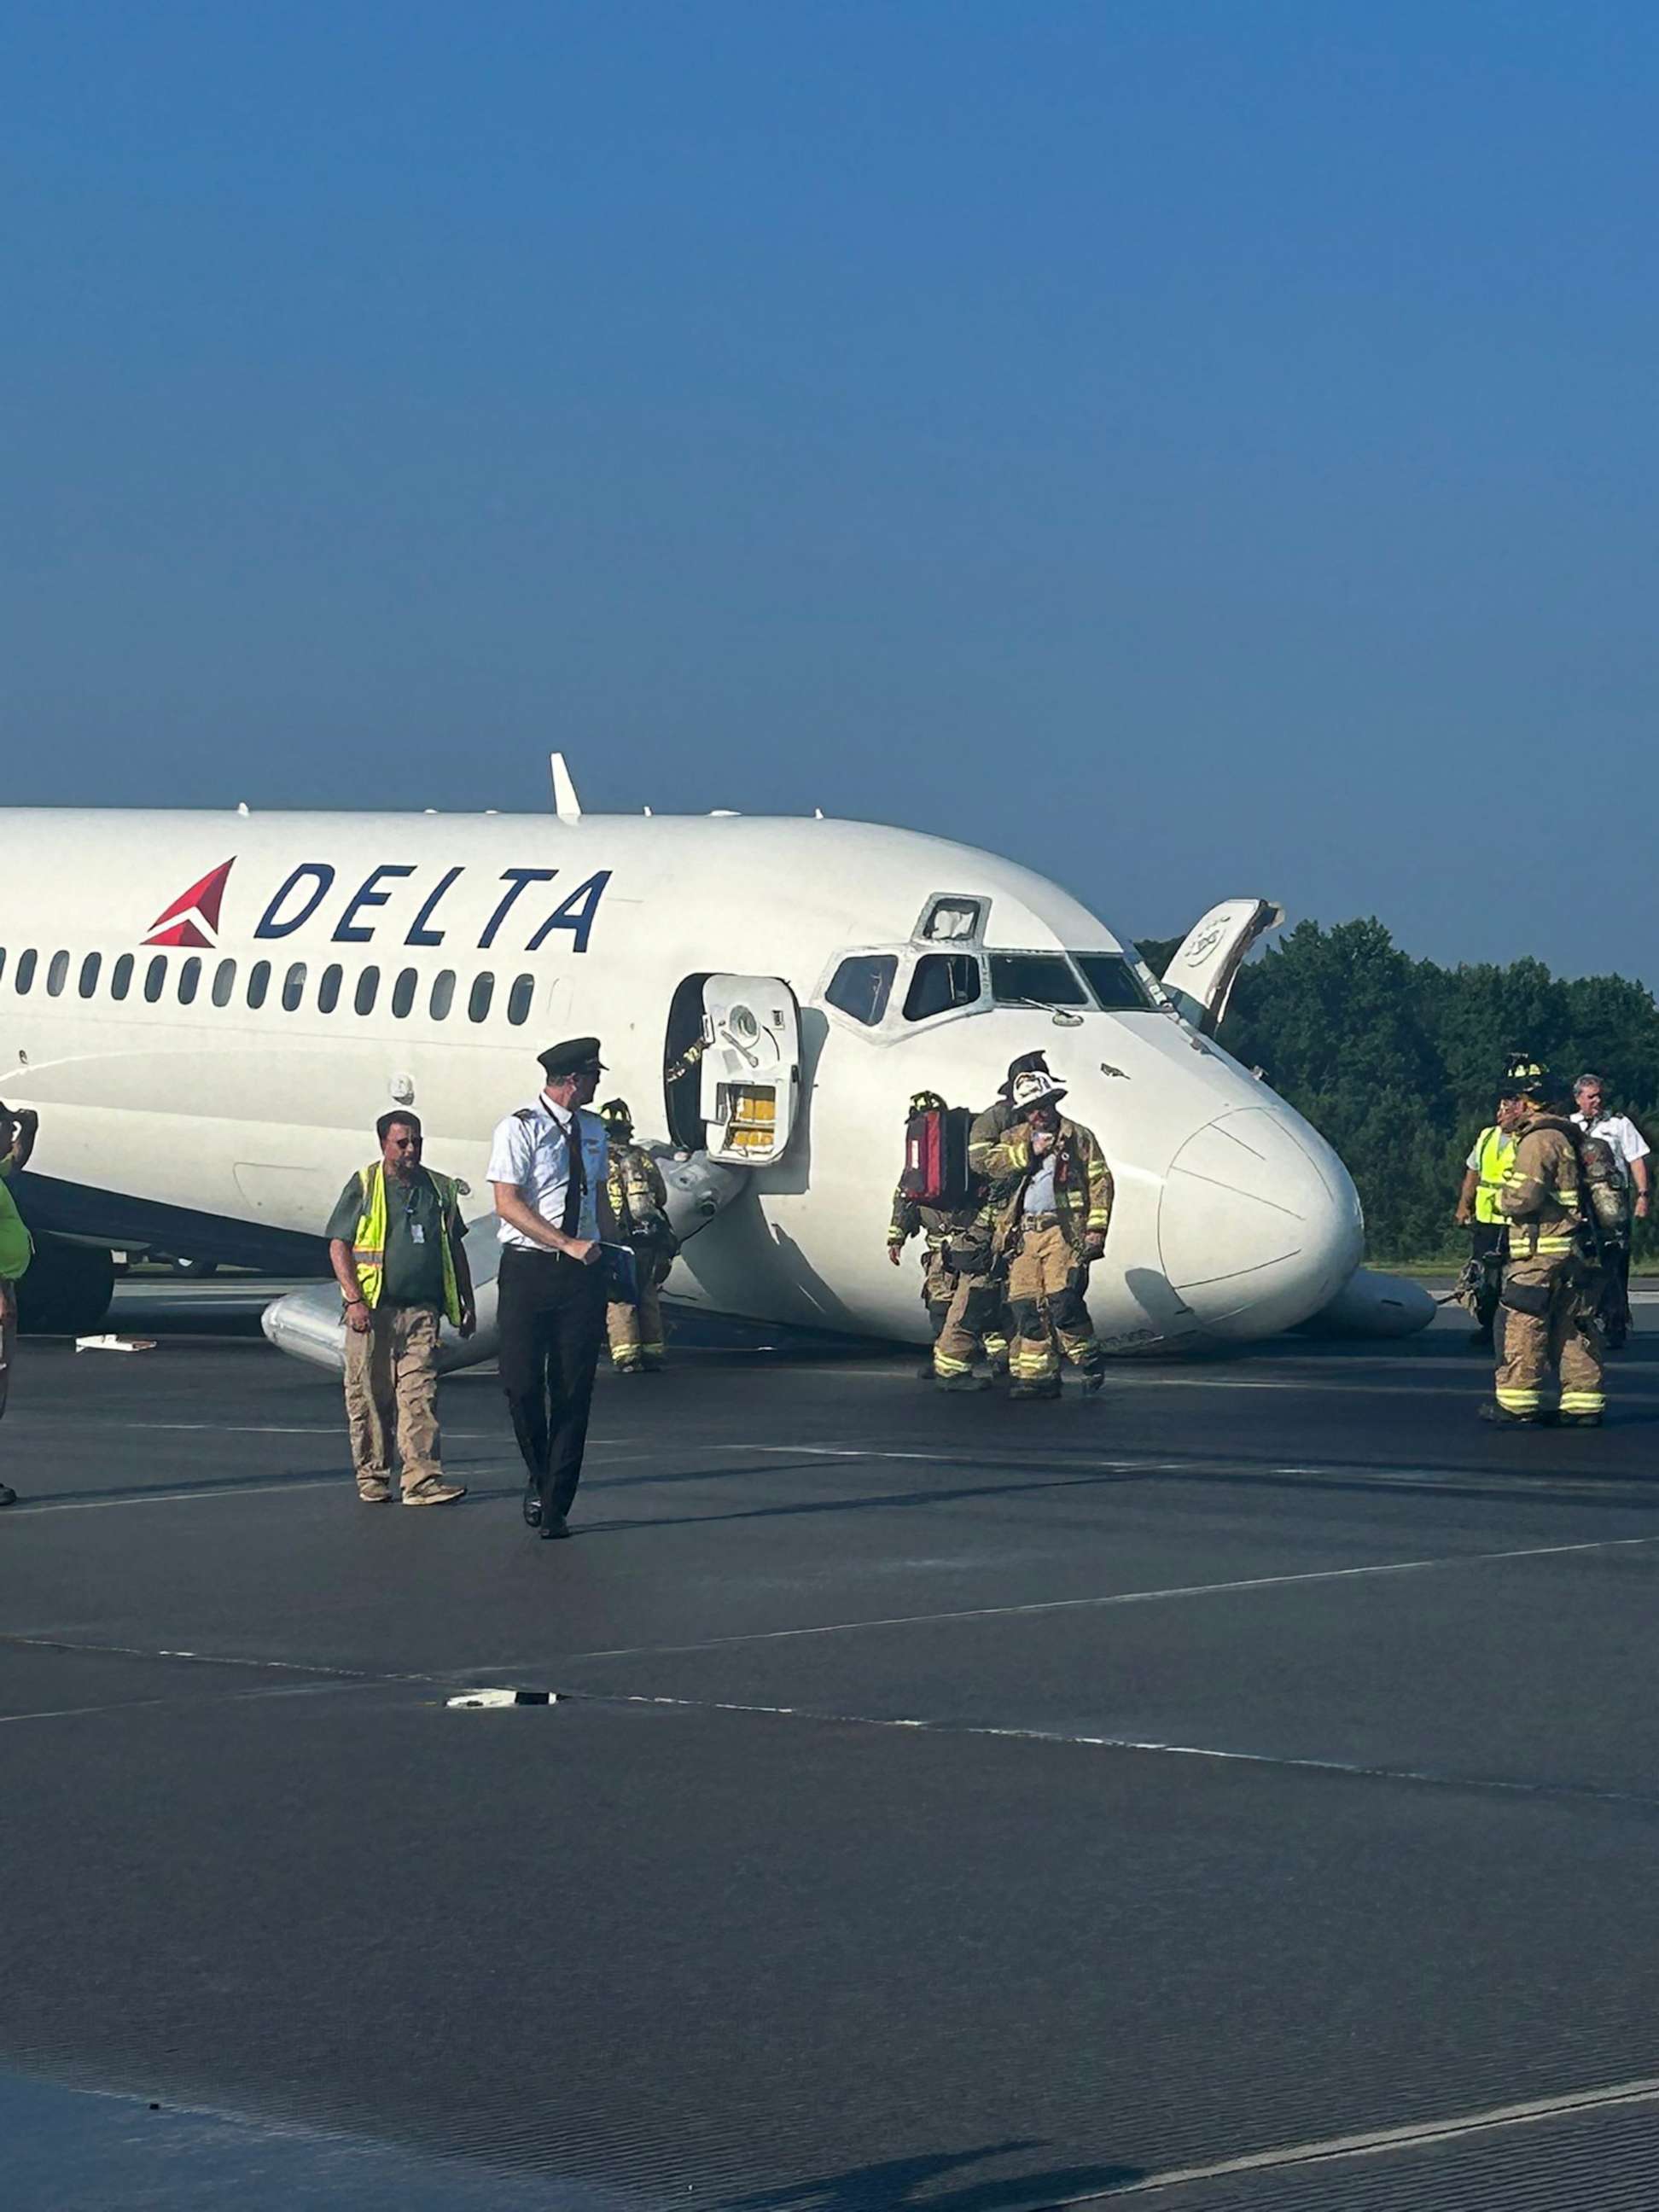 PHOTO: Firefighters attend to a passenger plane that landed at Charlotte Douglas International Airport in N.C. without its landing gear extended, June 28, 2023.